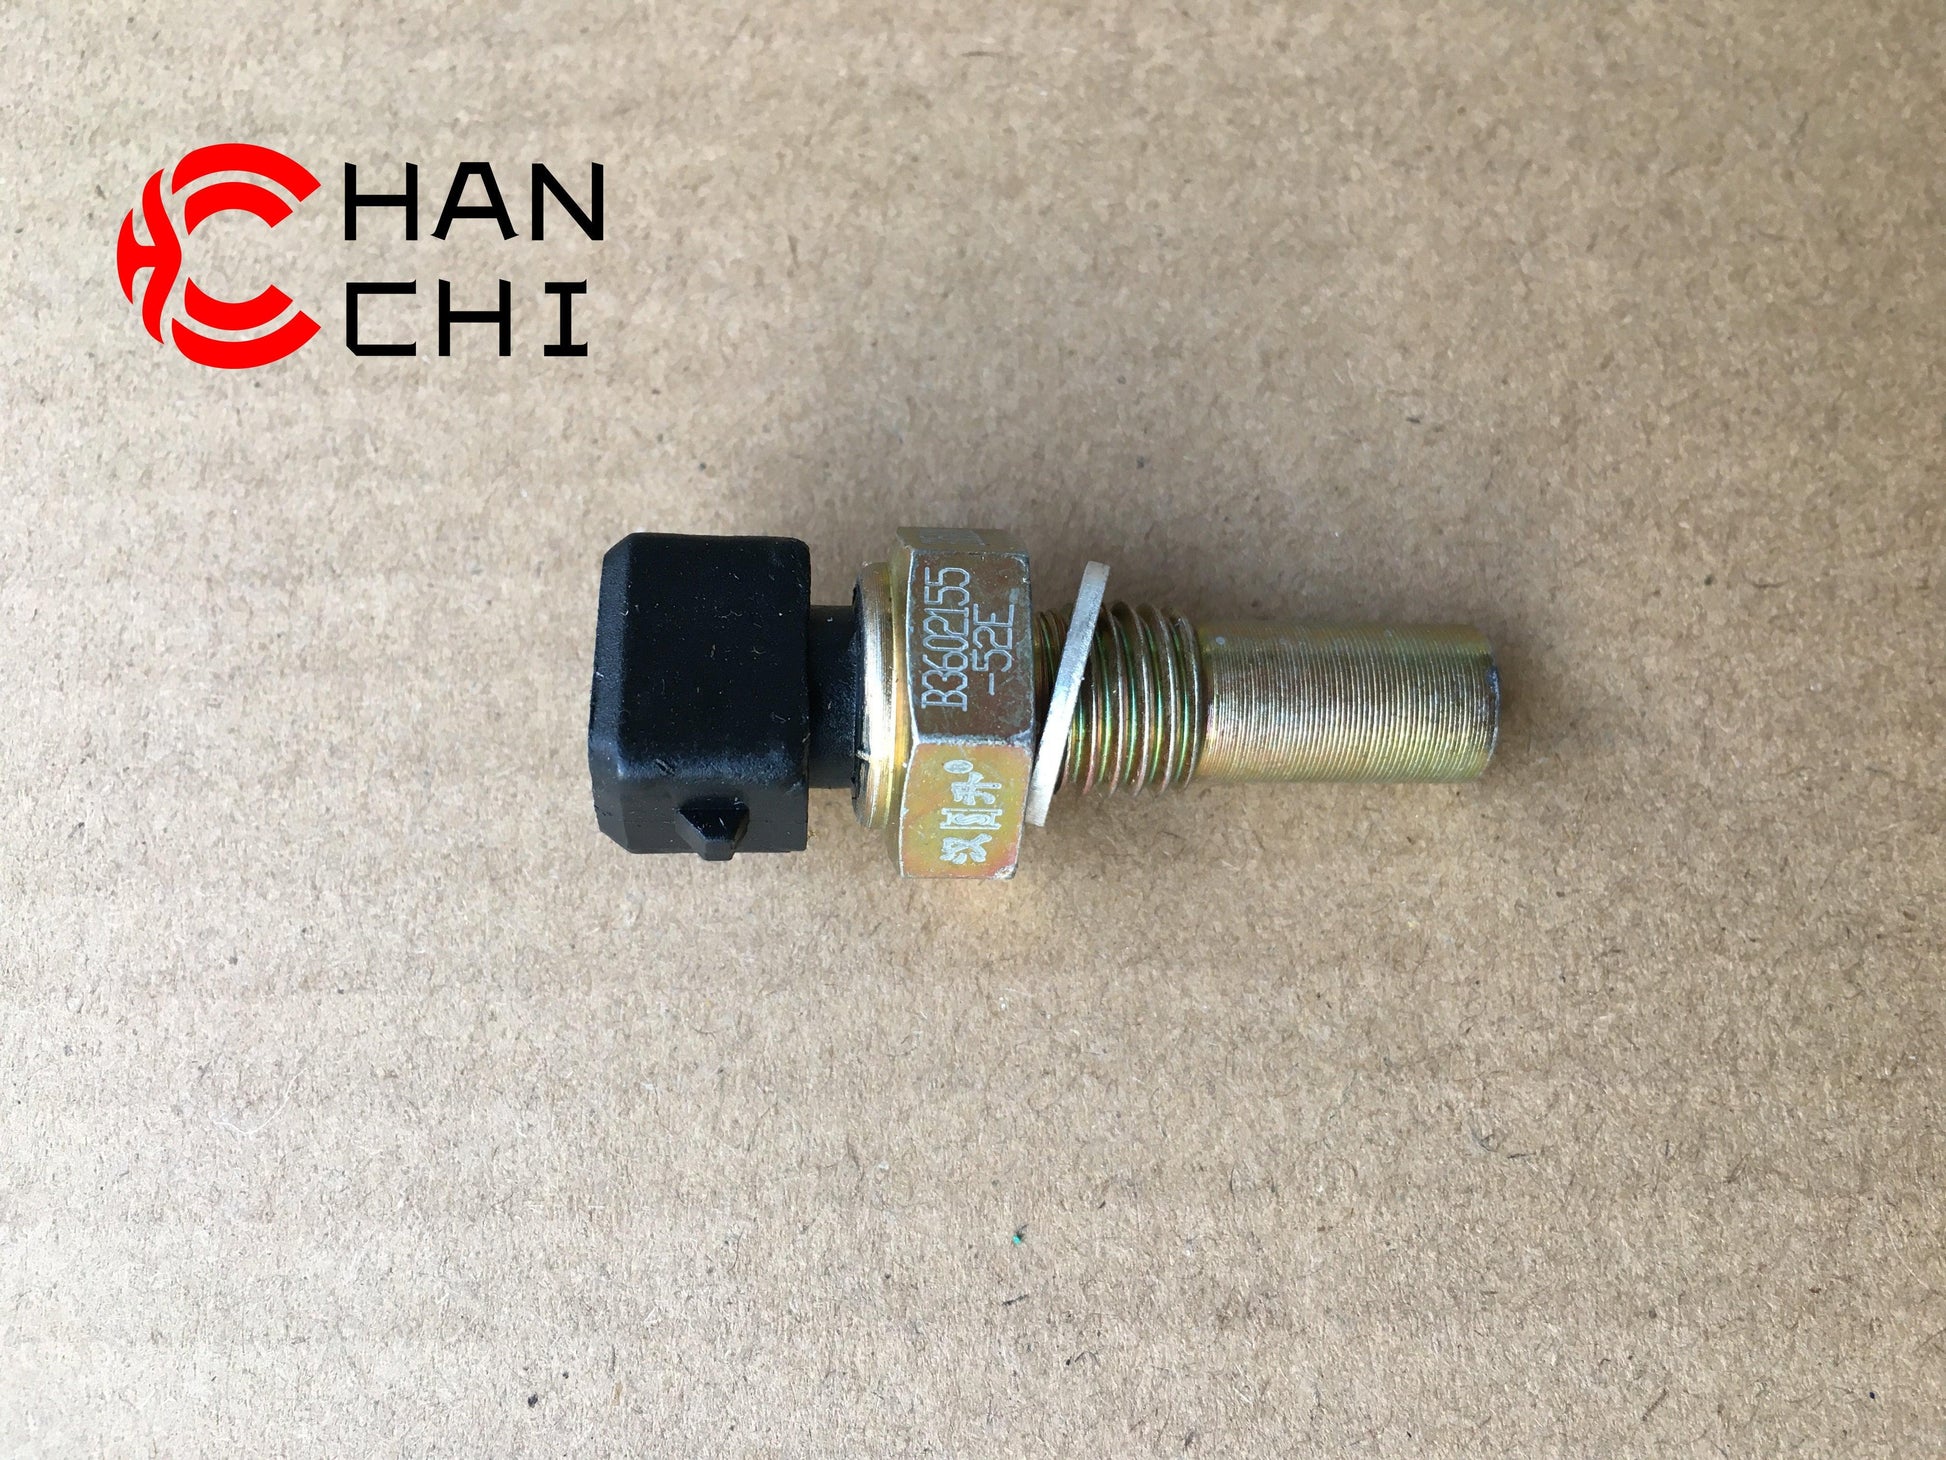 【Description】---☀Welcome to HANCHI☀---✔Good Quality✔Generally Applicability✔Competitive PriceEnjoy your shopping time↖（^ω^）↗【Features】Brand-New with High Quality for the Aftermarket.Totally mathced your need.**Stable Quality**High Precision**Easy Installation**【Specification】OEM：3602155-52E 3602155B607-0000Material：metalColor：goldenOrigin：Made in ChinaWeight：100g【Packing List】1*Temperature Sensor